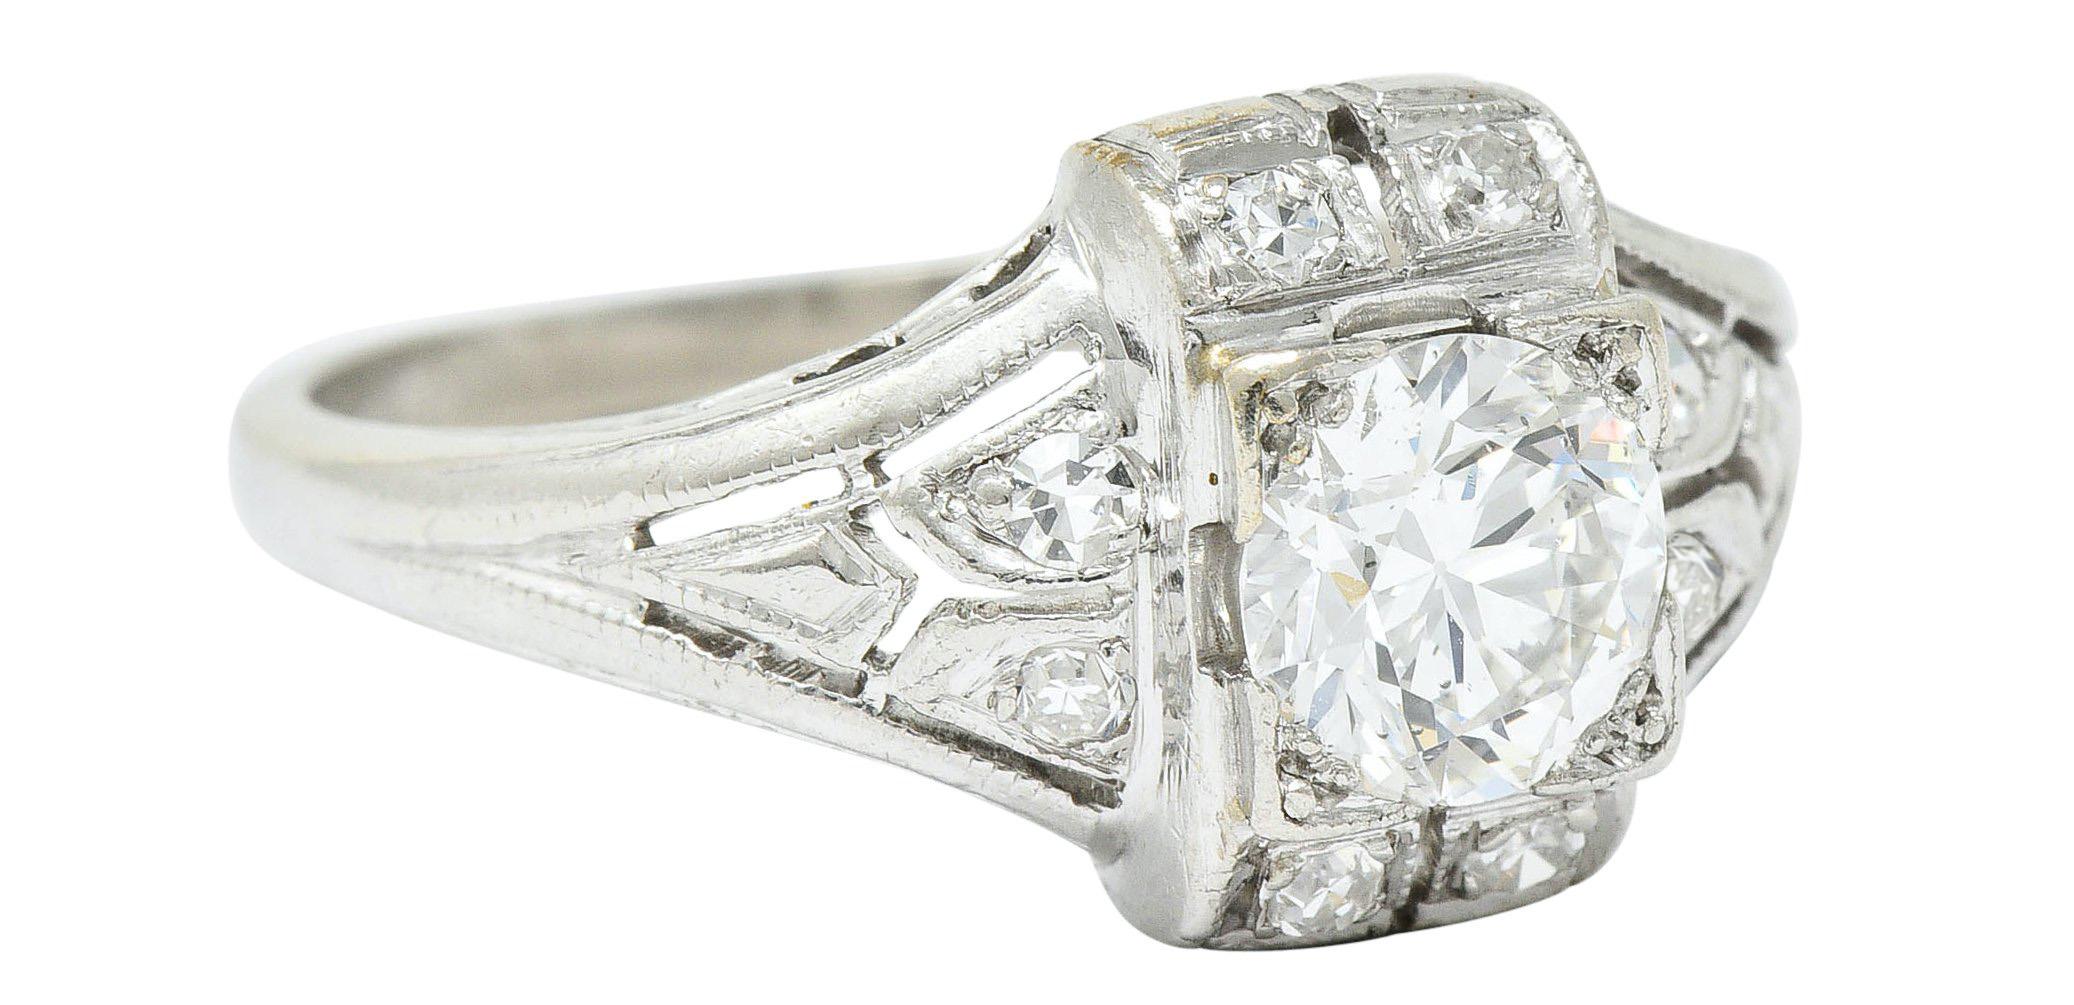 Dinner style ring with a rectangular center featuring a square form head

Set with a transitional cut diamond weighing approximately 0.65 carat; H color and VS2 clarity

Surrounded by single cut diamonds weighing in total approximately 0.20 carat;